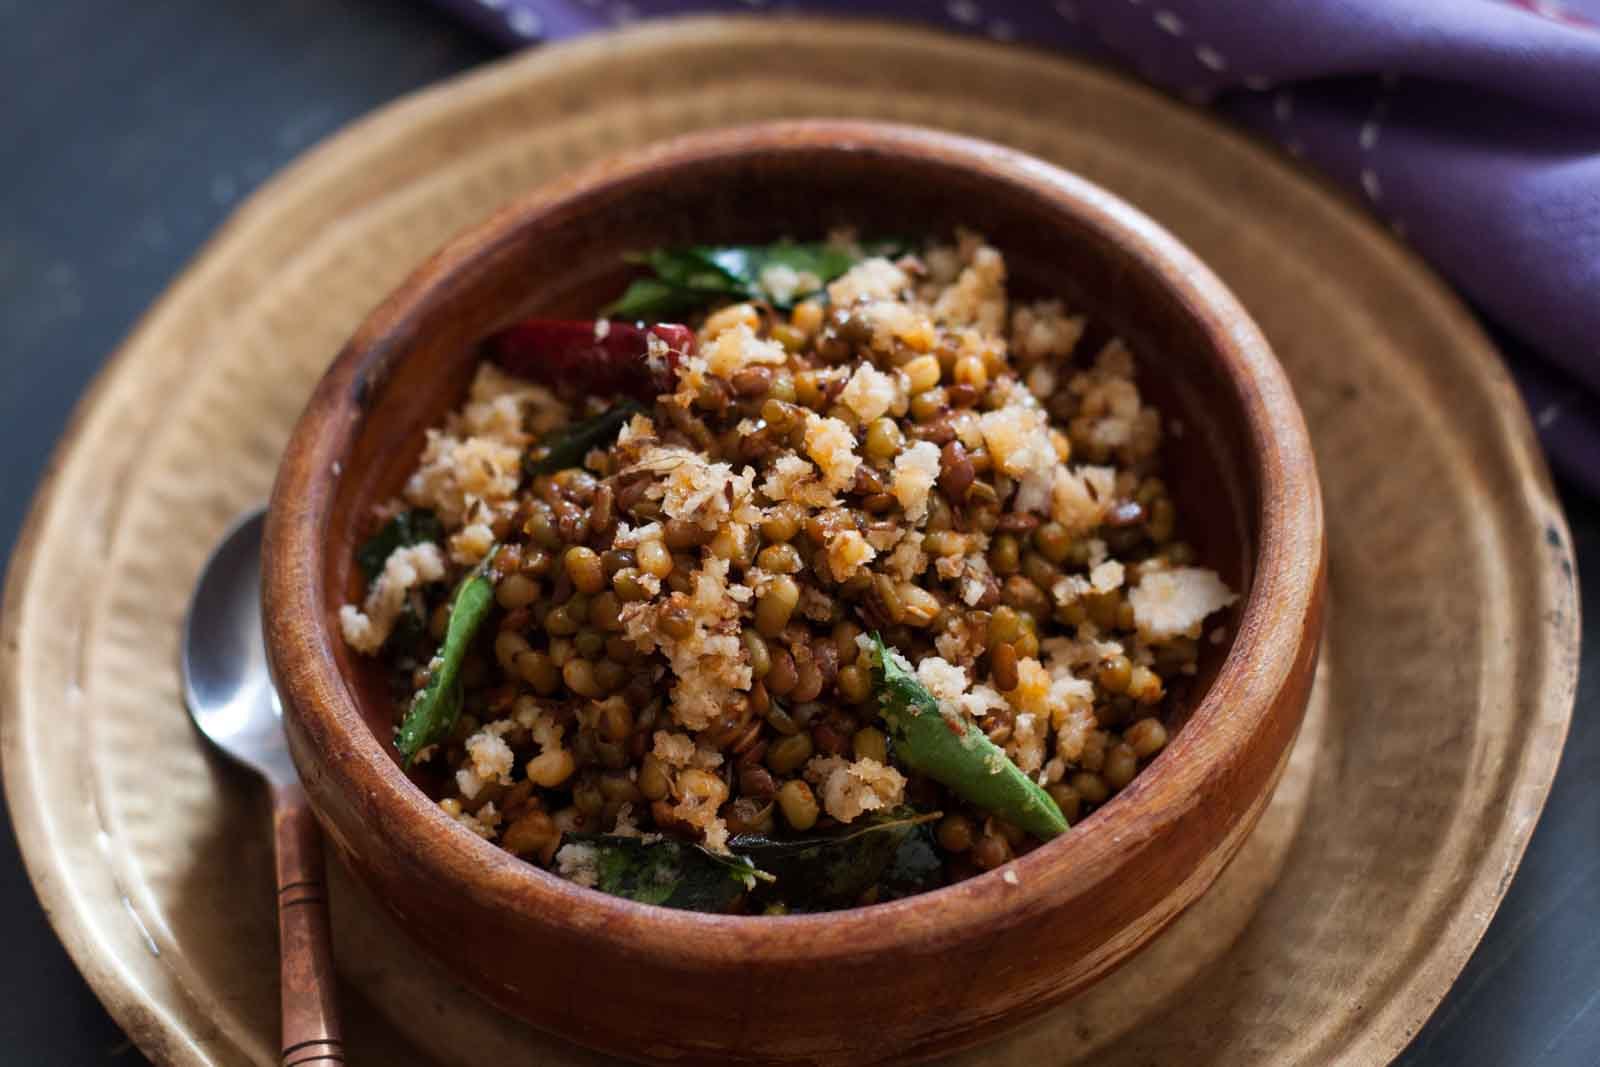 Matki Chi Usal Recipe - Spicy Moth Sprouted Salad